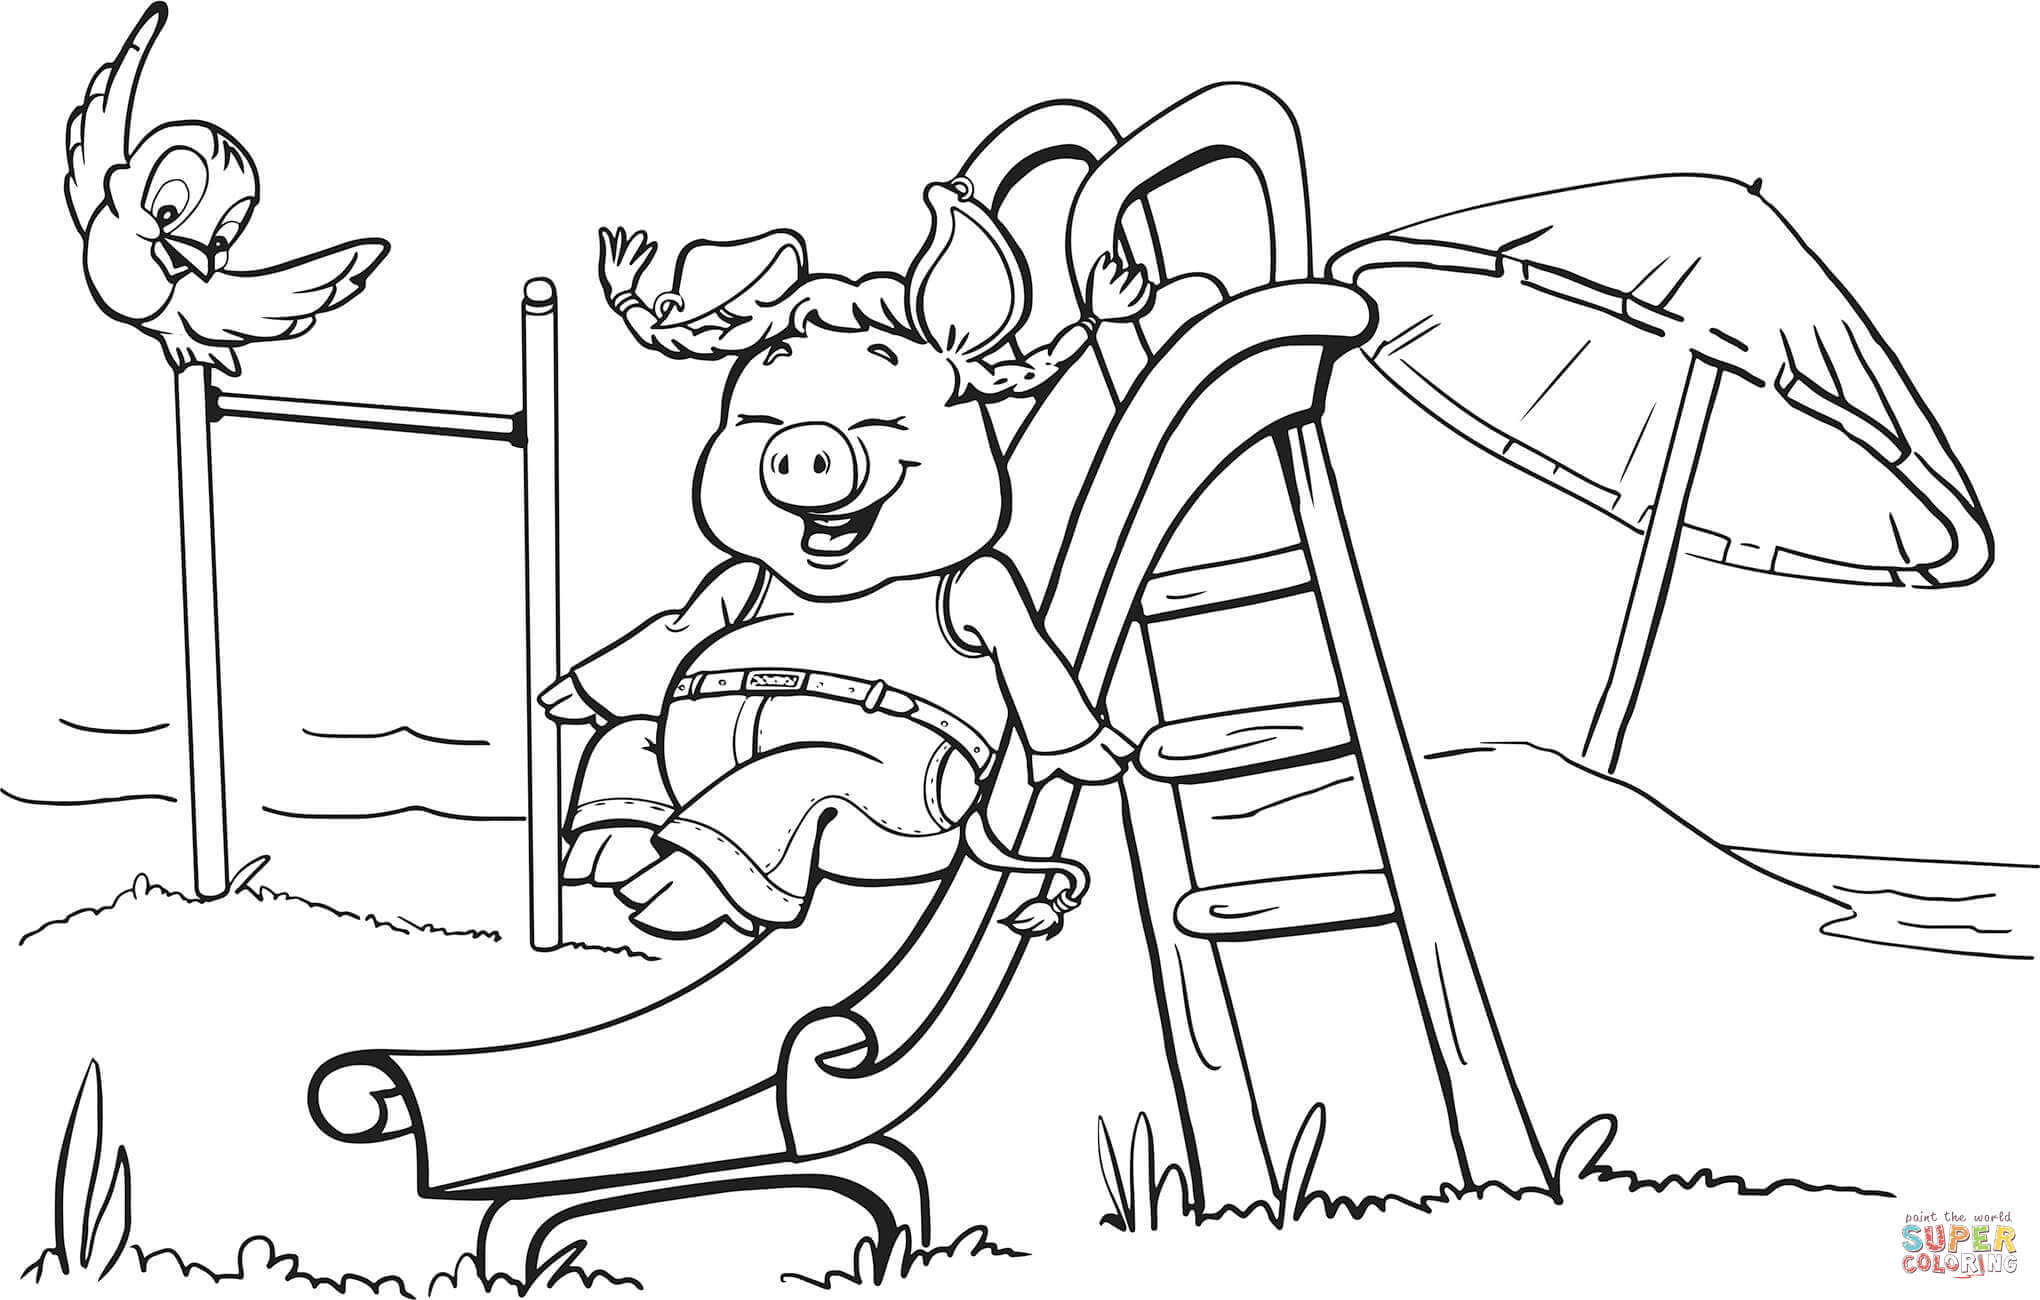 Pig on the Playground Slide coloring page